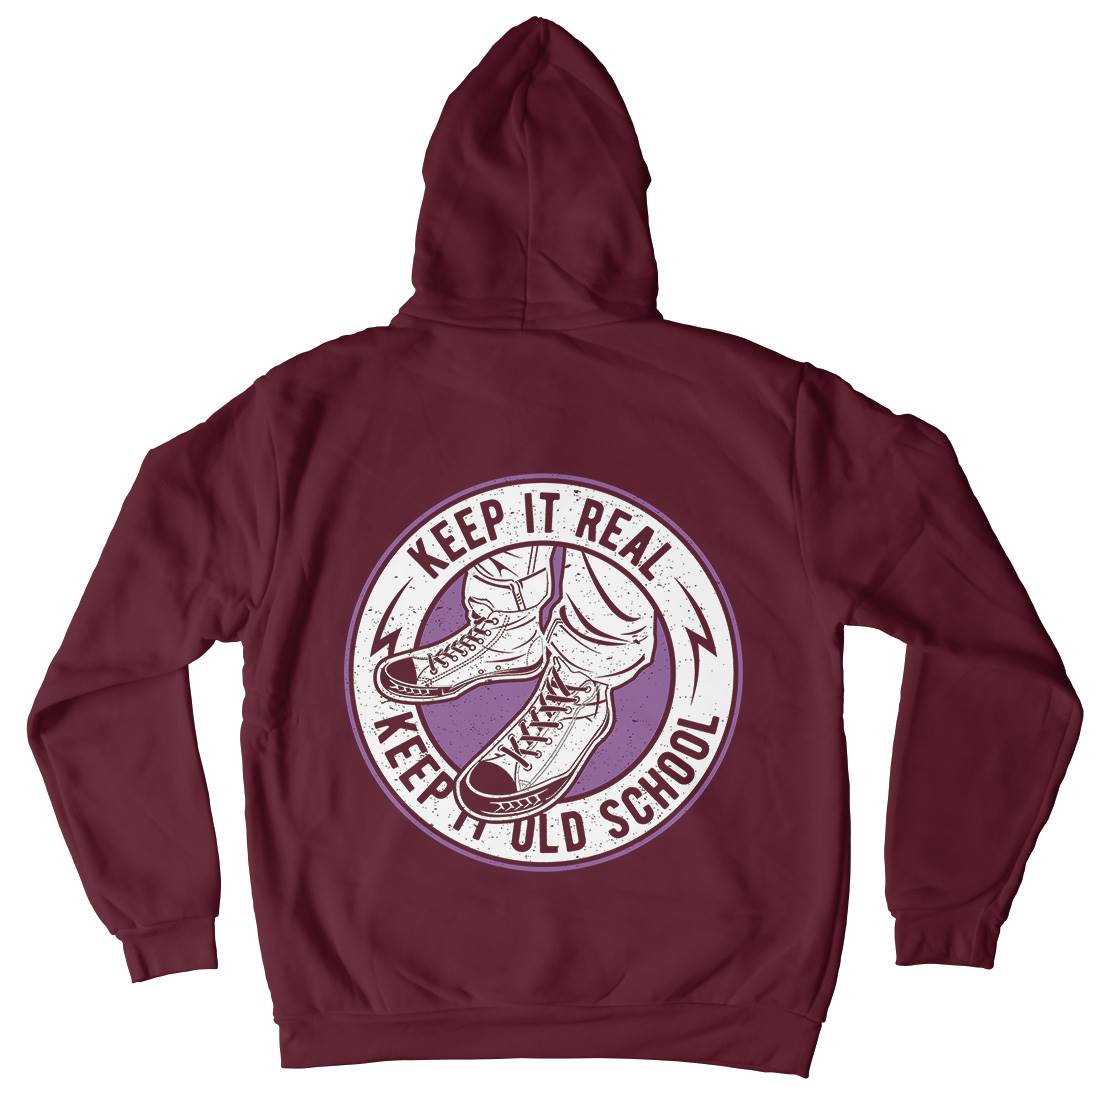 Keep It Old School Mens Hoodie With Pocket Retro A074